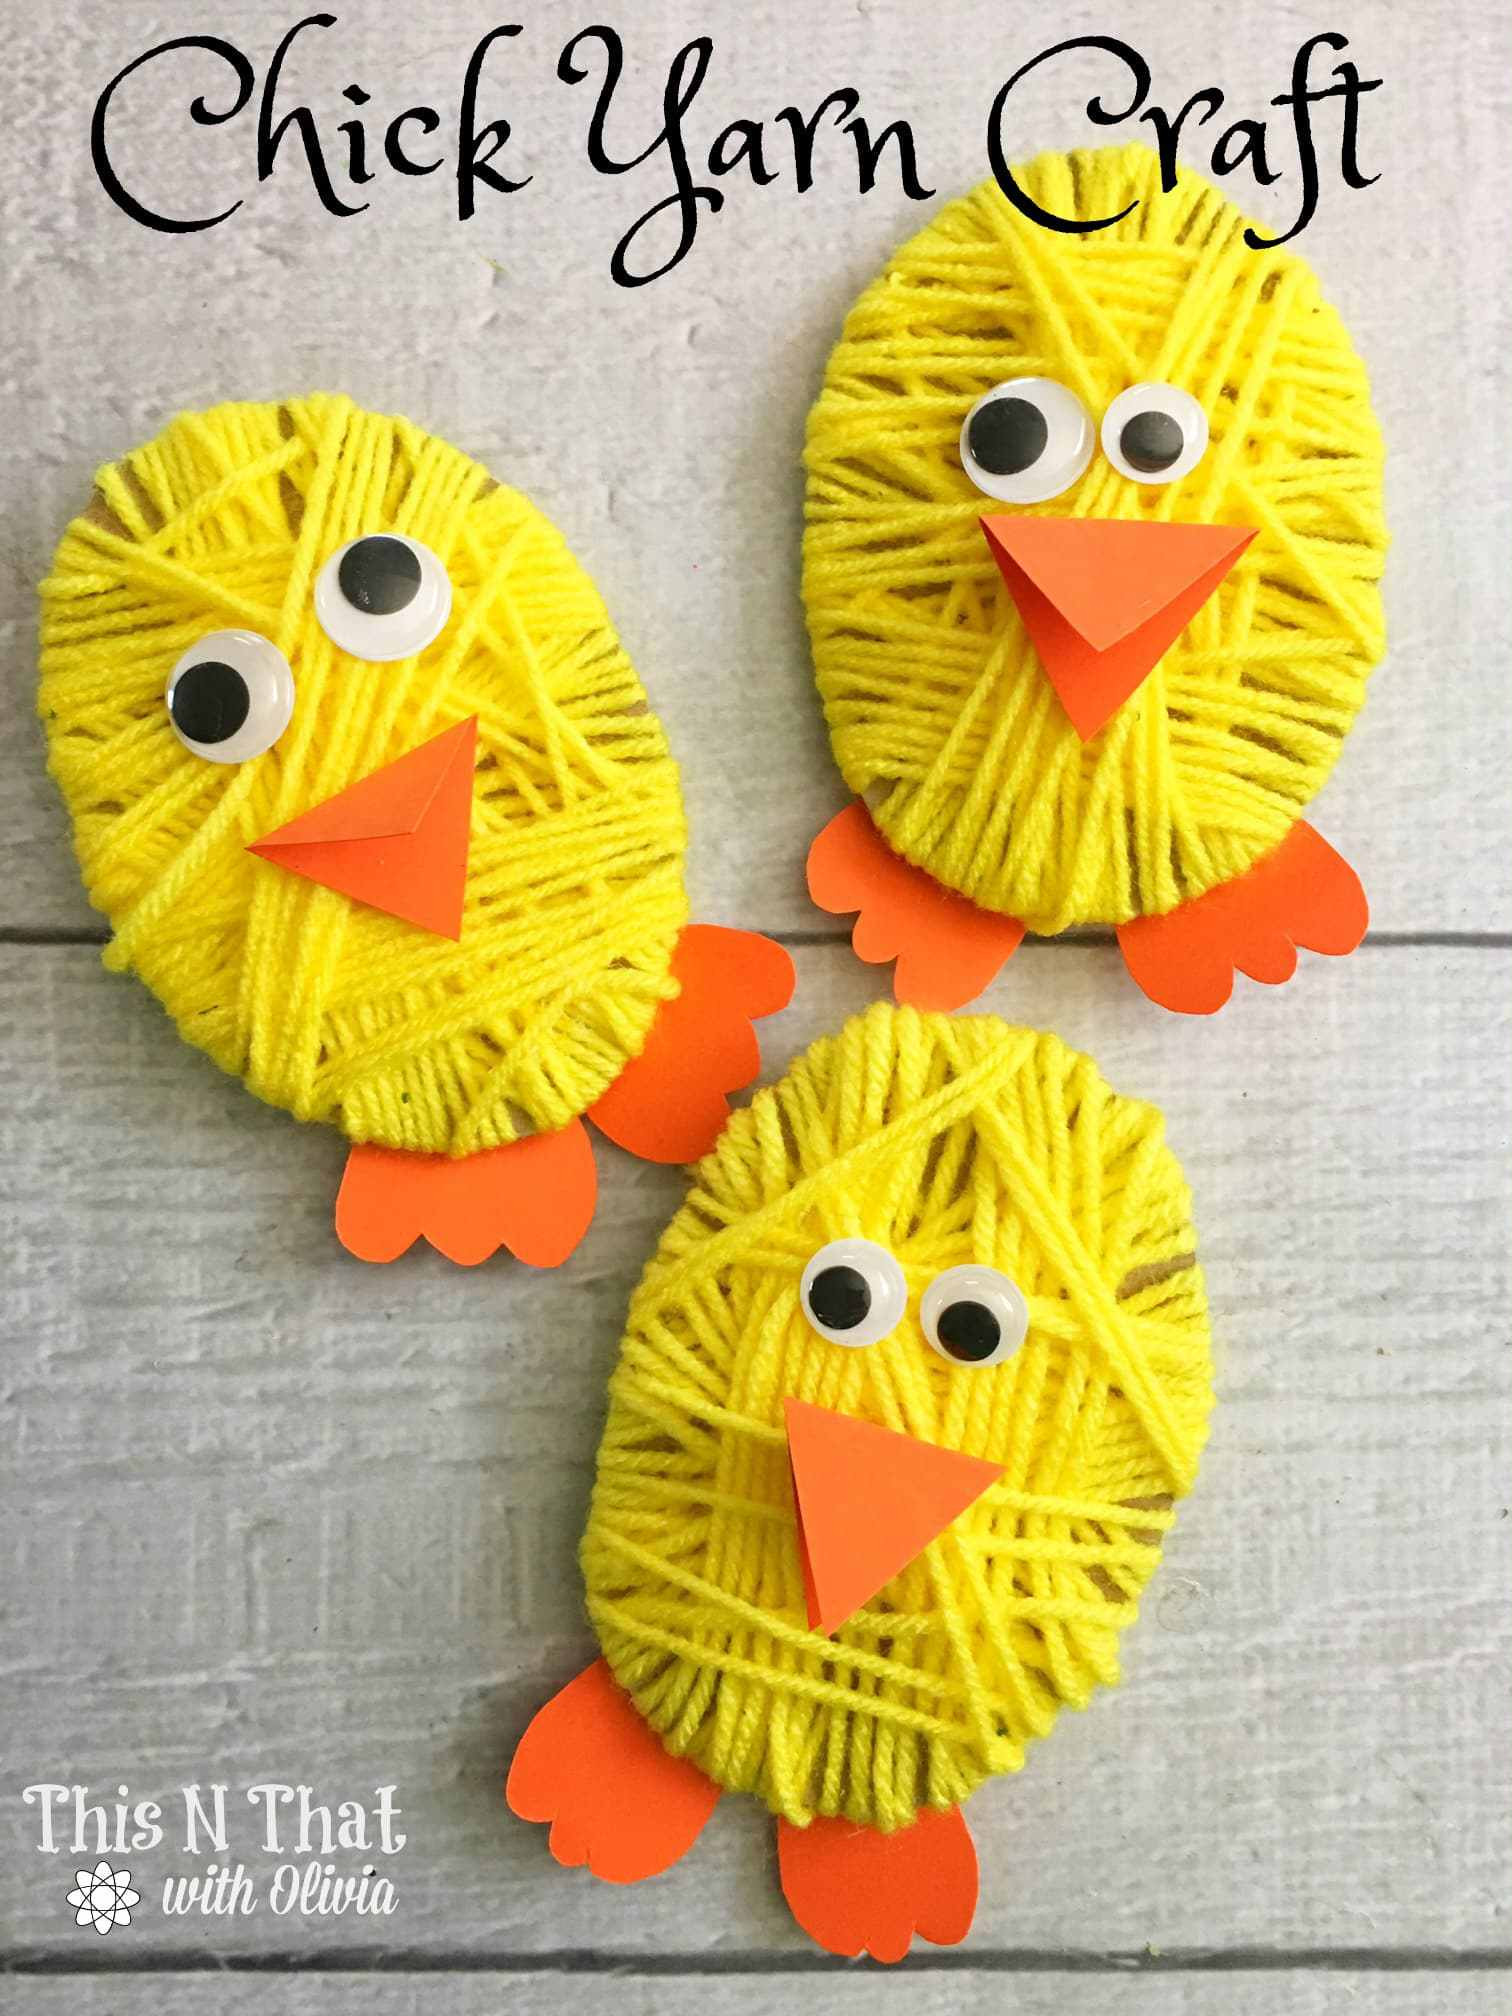 Kindergarten Easter Crafts
 Over 33 Easter Craft Ideas for Kids to Make Simple Cute